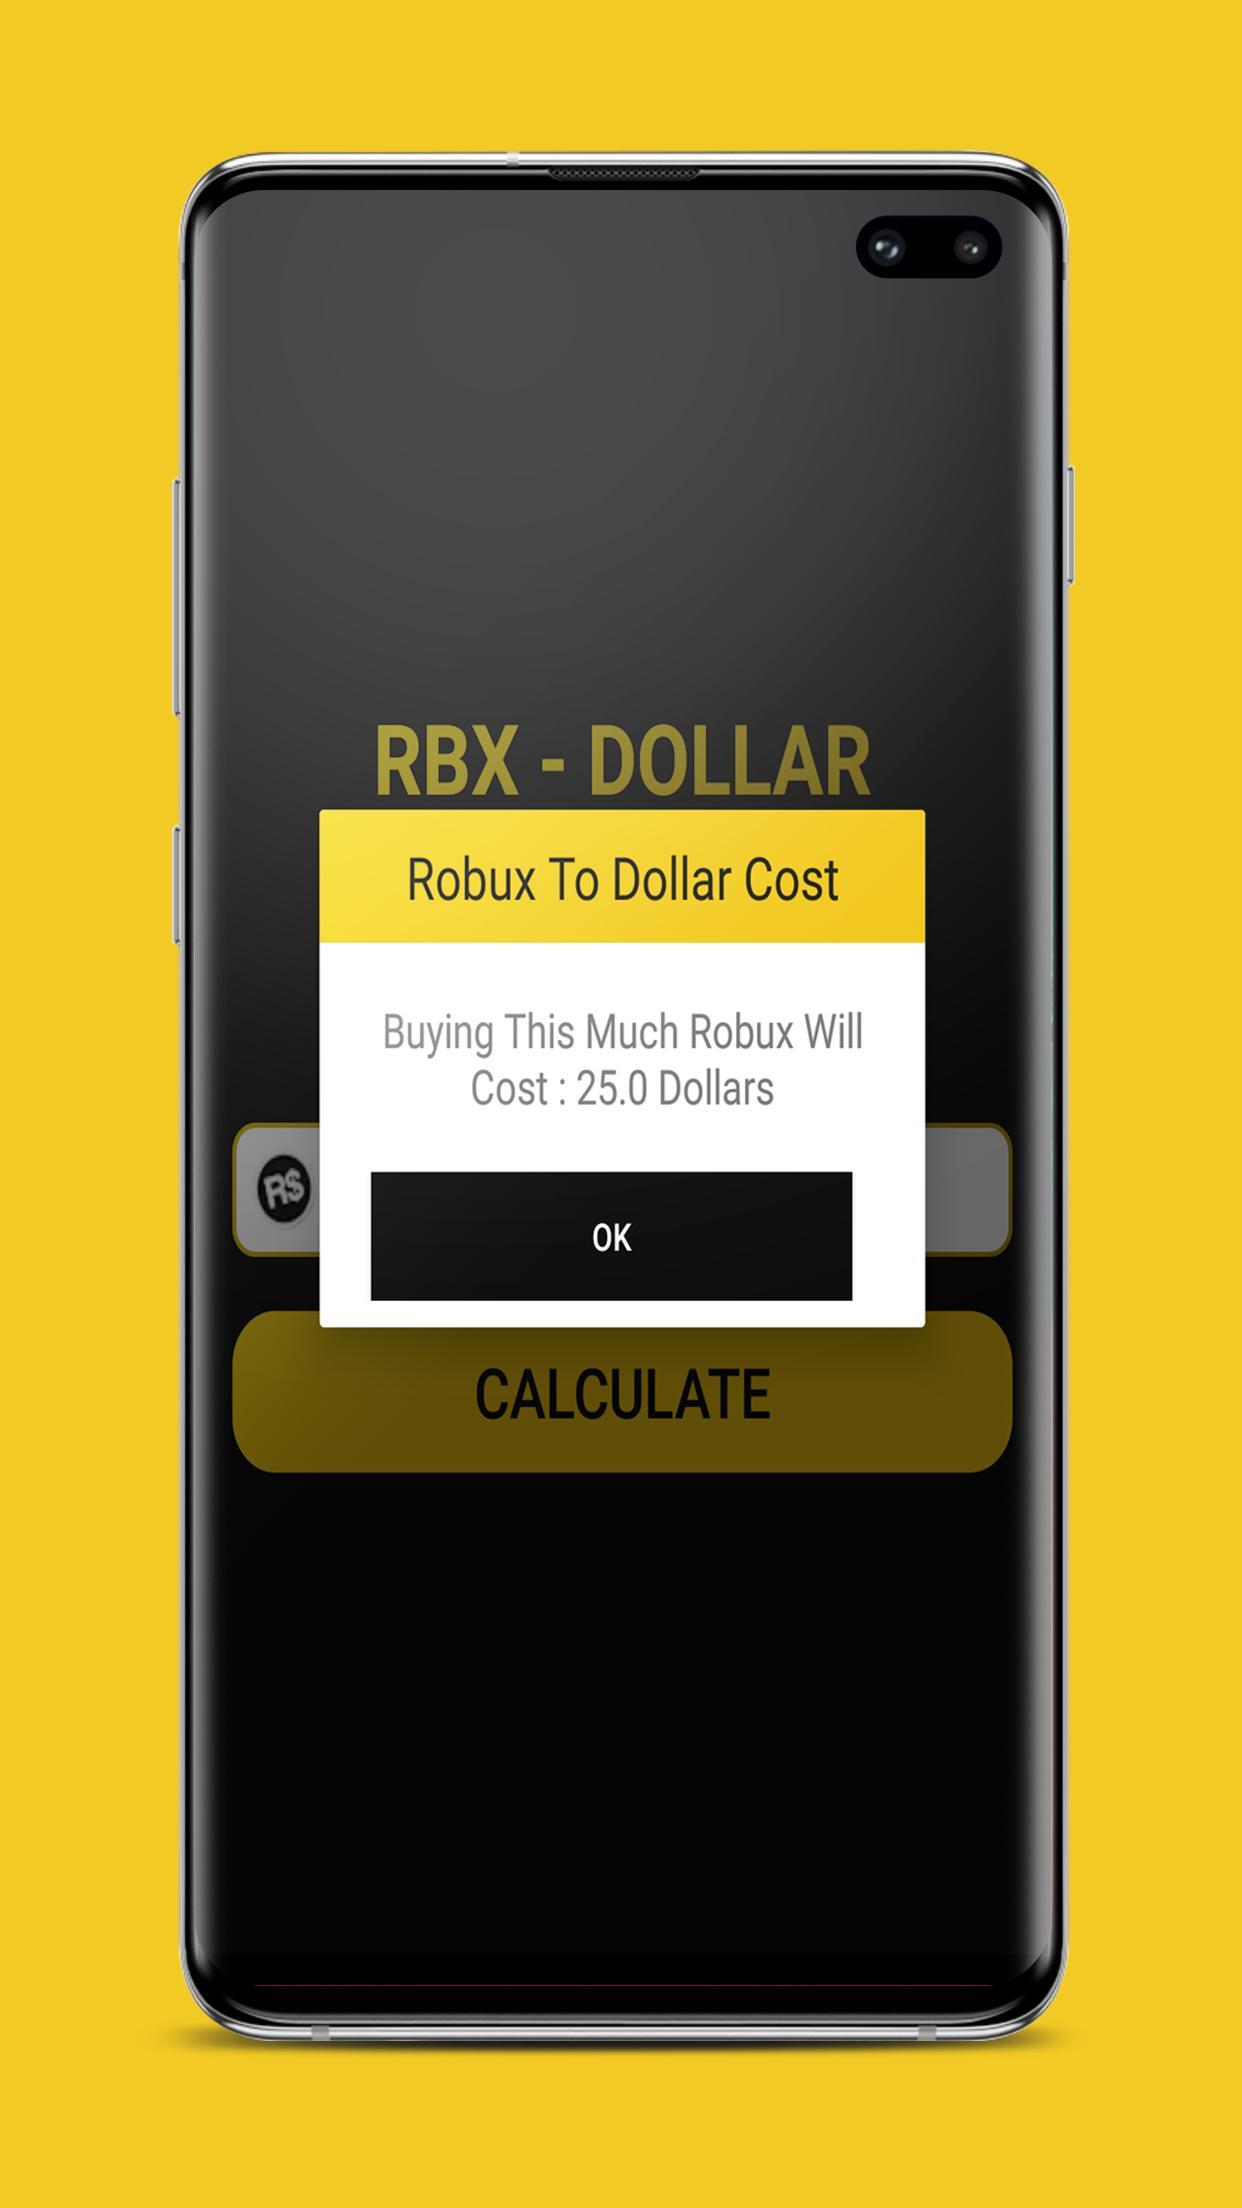 Buying Robux From Rbx Place Roblox Unblocked Roblox Free Robux Codes 2019 August Calendar - rbx place logo